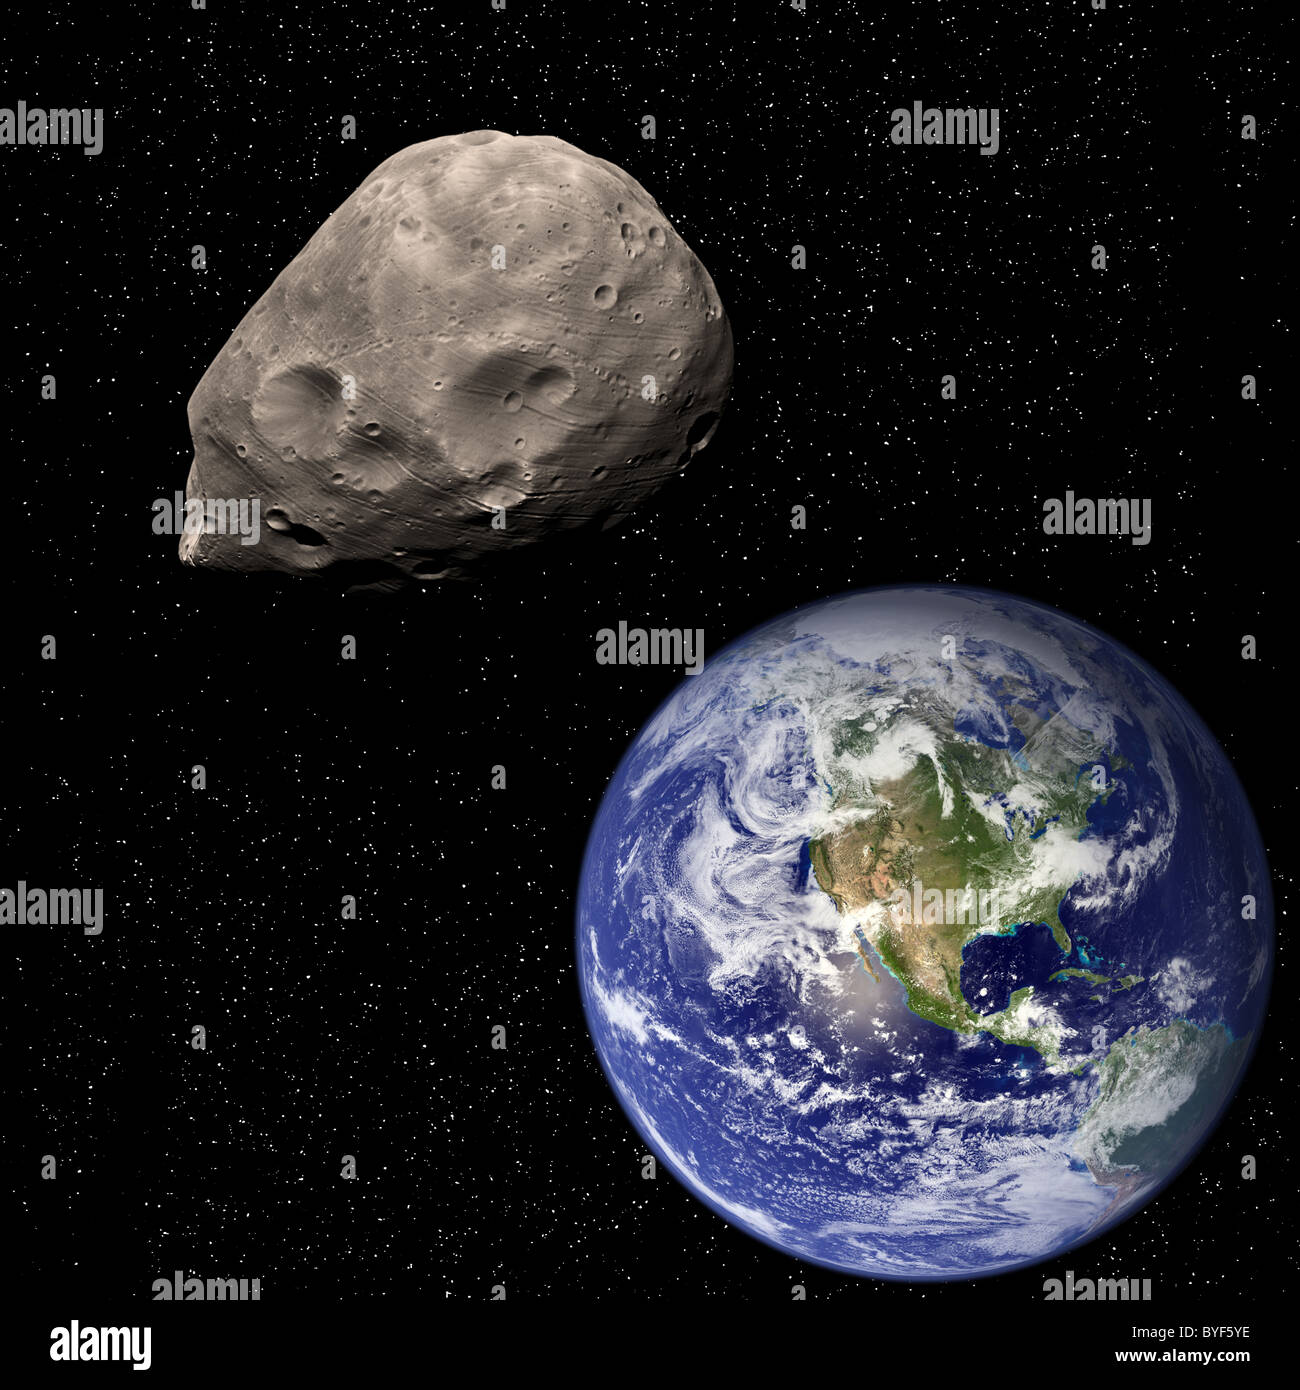 Asteroid heading for Earth. Stock Photo